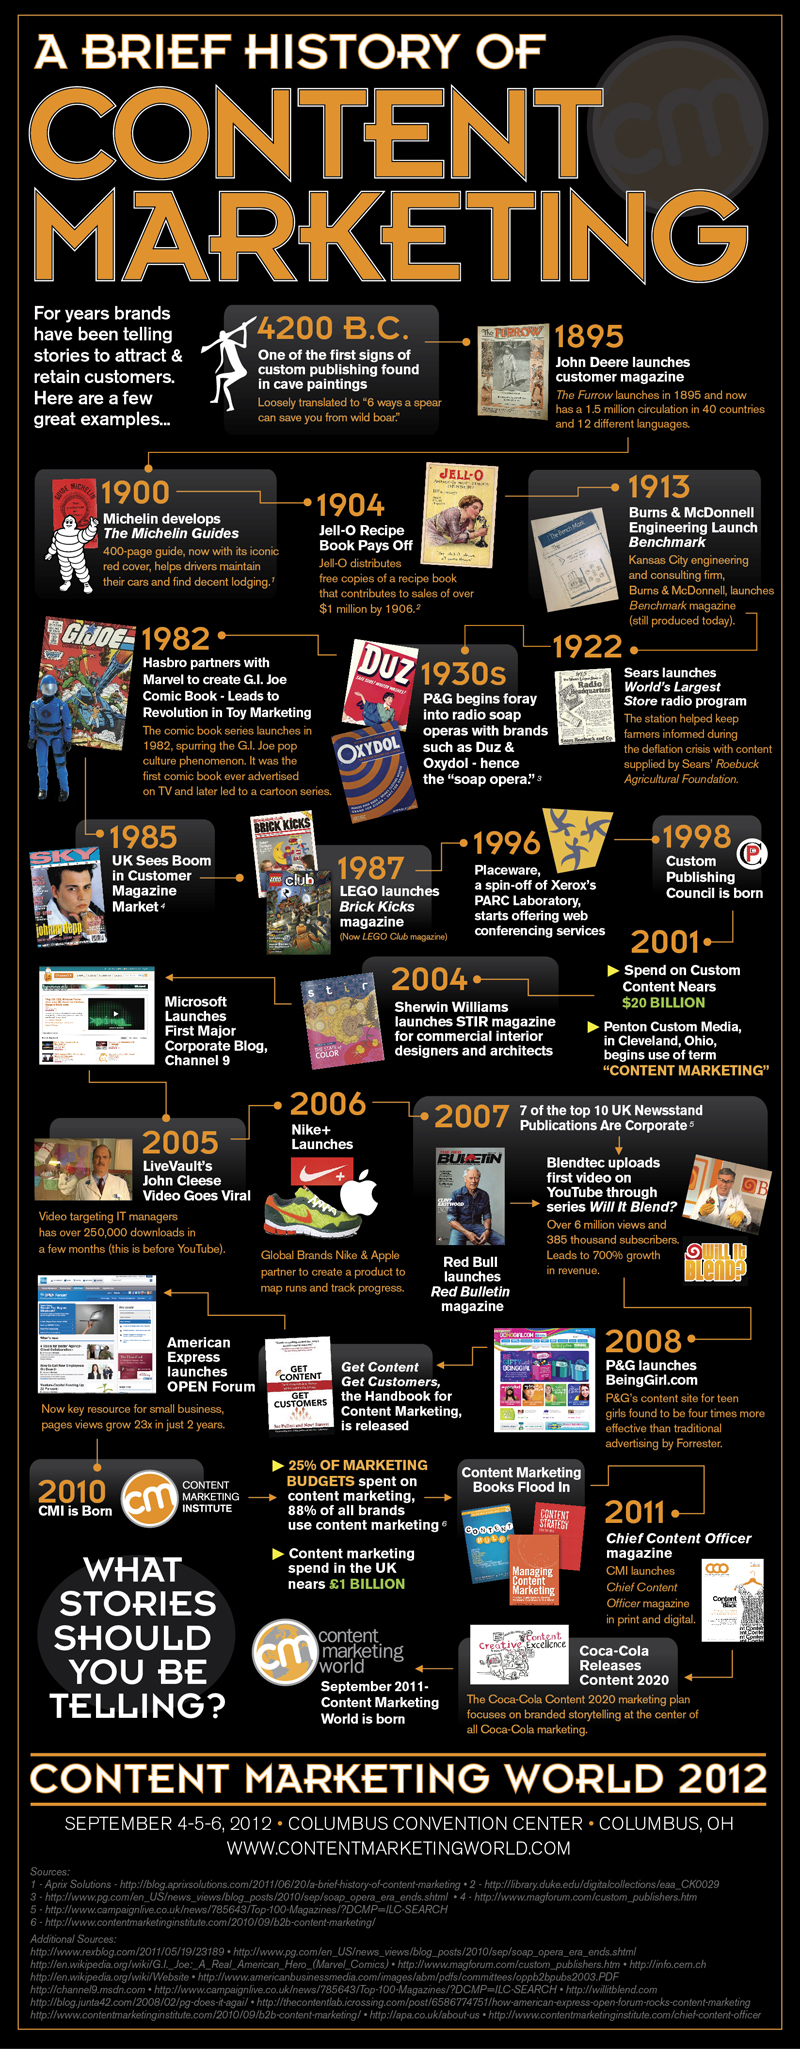 History of Content Marketing is Older than Most Imagine (info graphic)